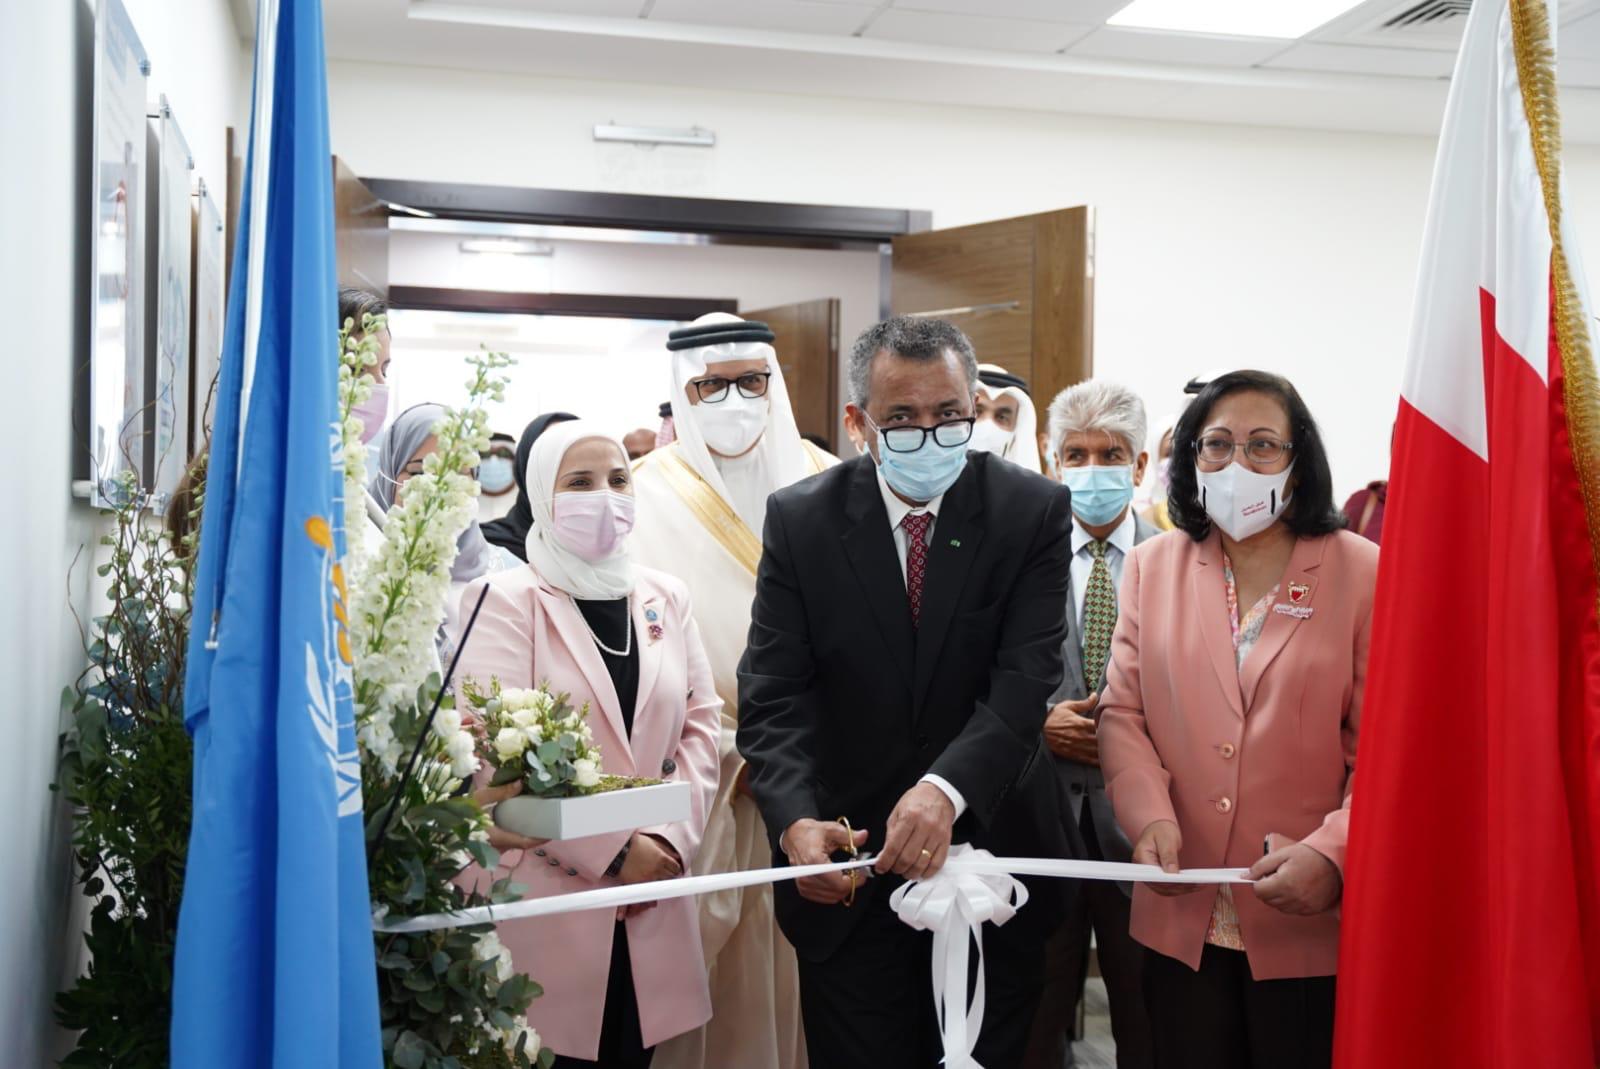 WORLD HEALTH ORGANIZATION (WHO) DIRECTOR GENERAL OFFICIALLY OPENS OFFICE IN BAHRAIN